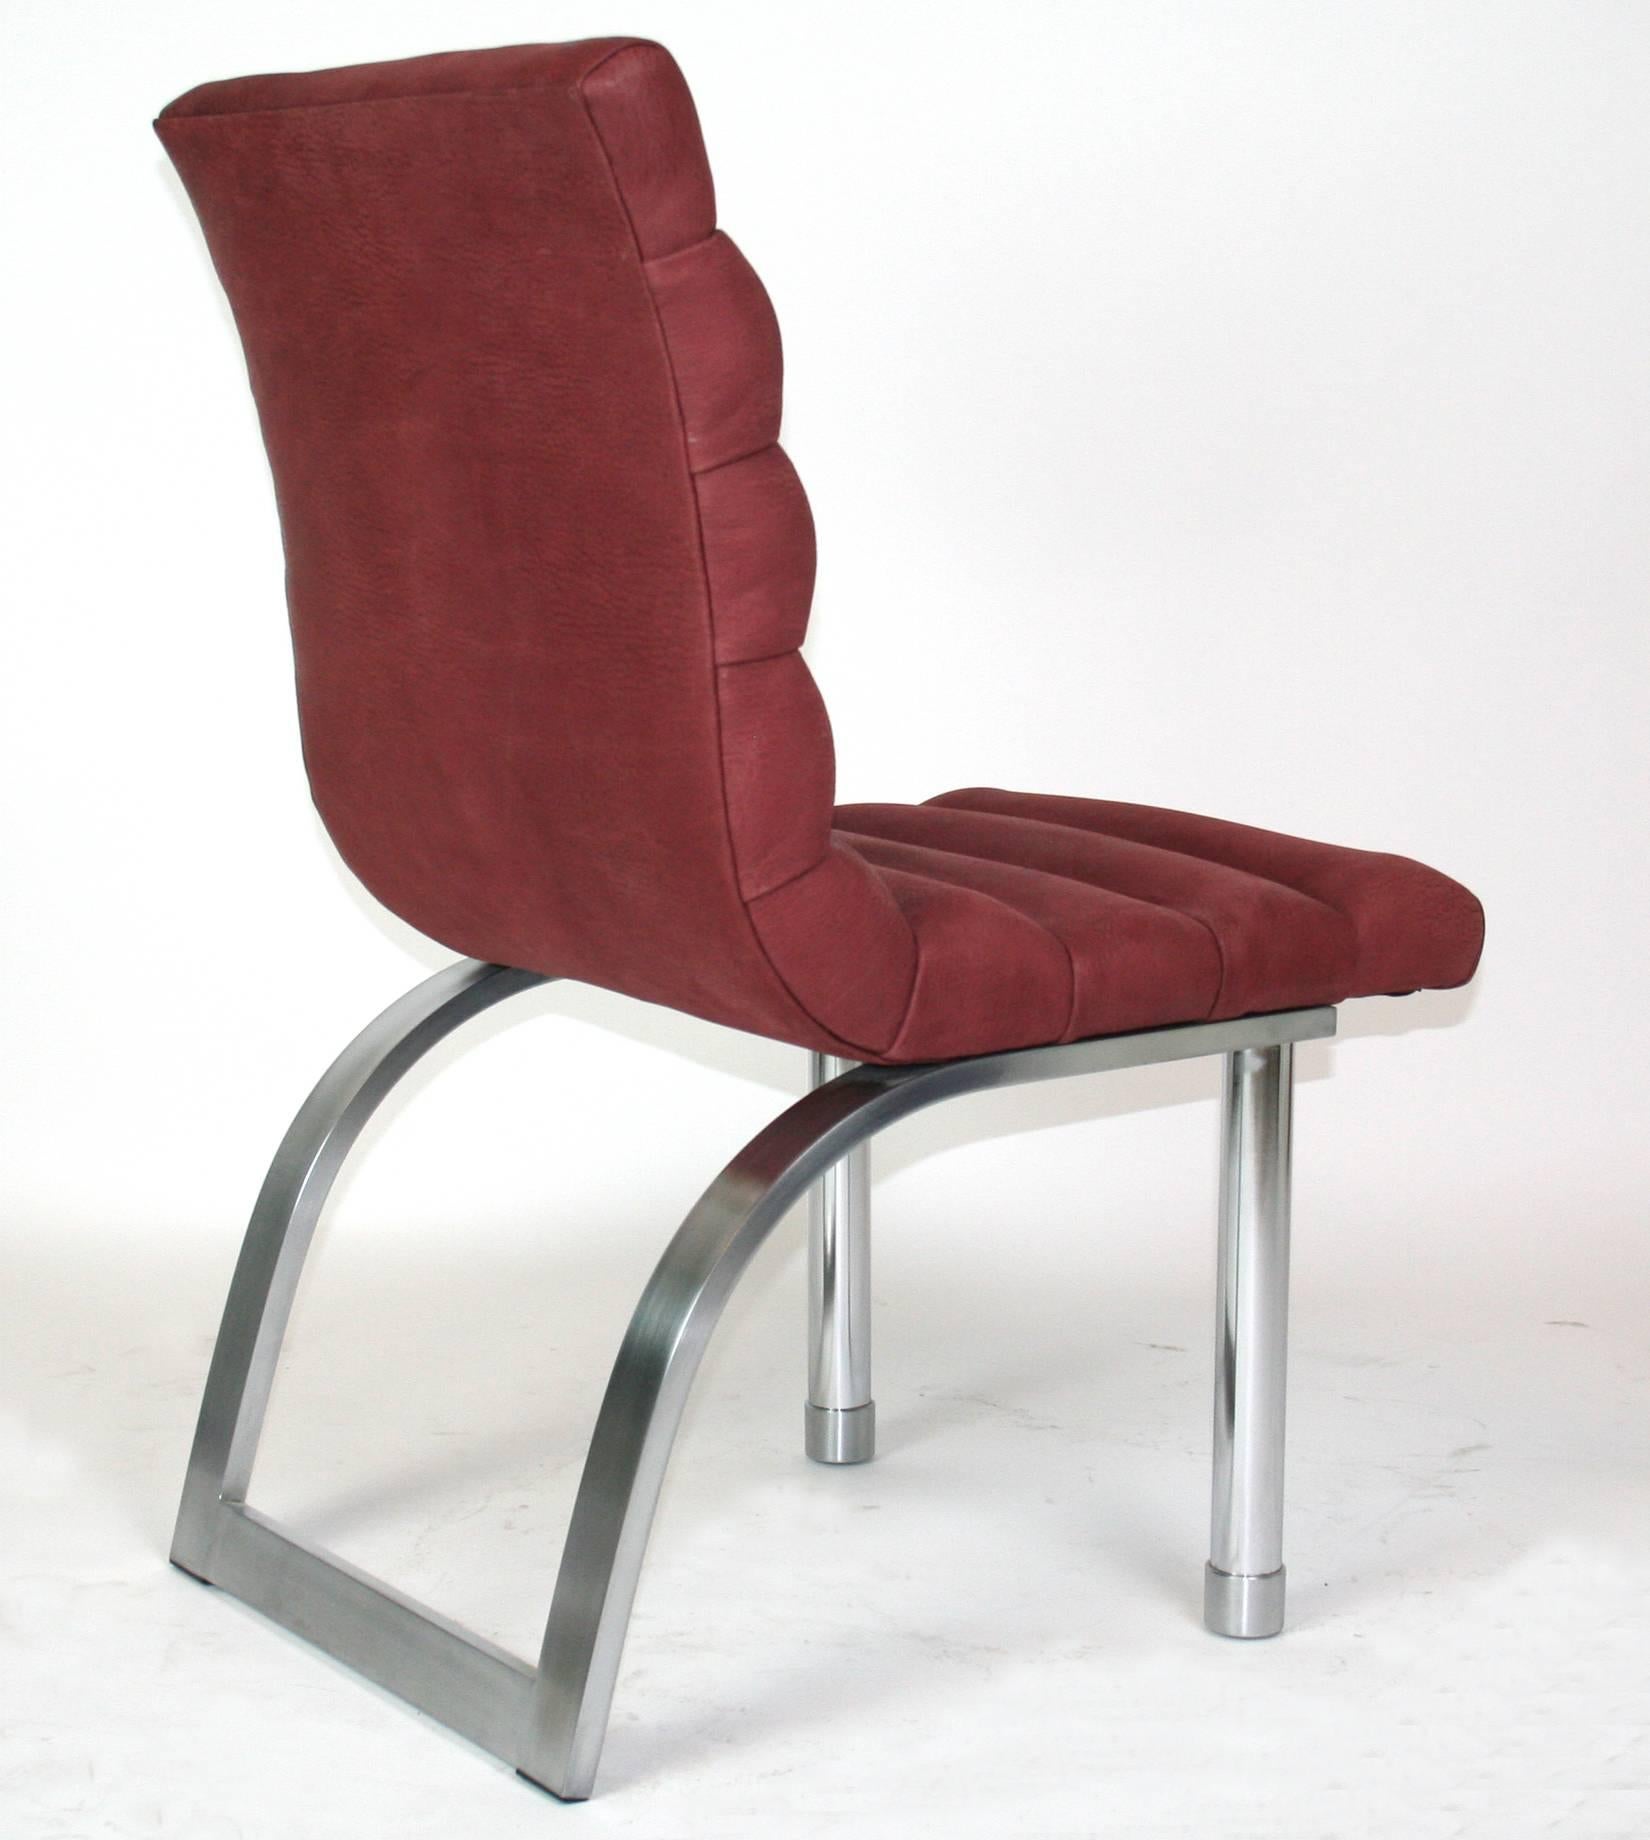 A channel tufted side chair by Jay Spectre for century furniture. Newly upholstered in plum suede.